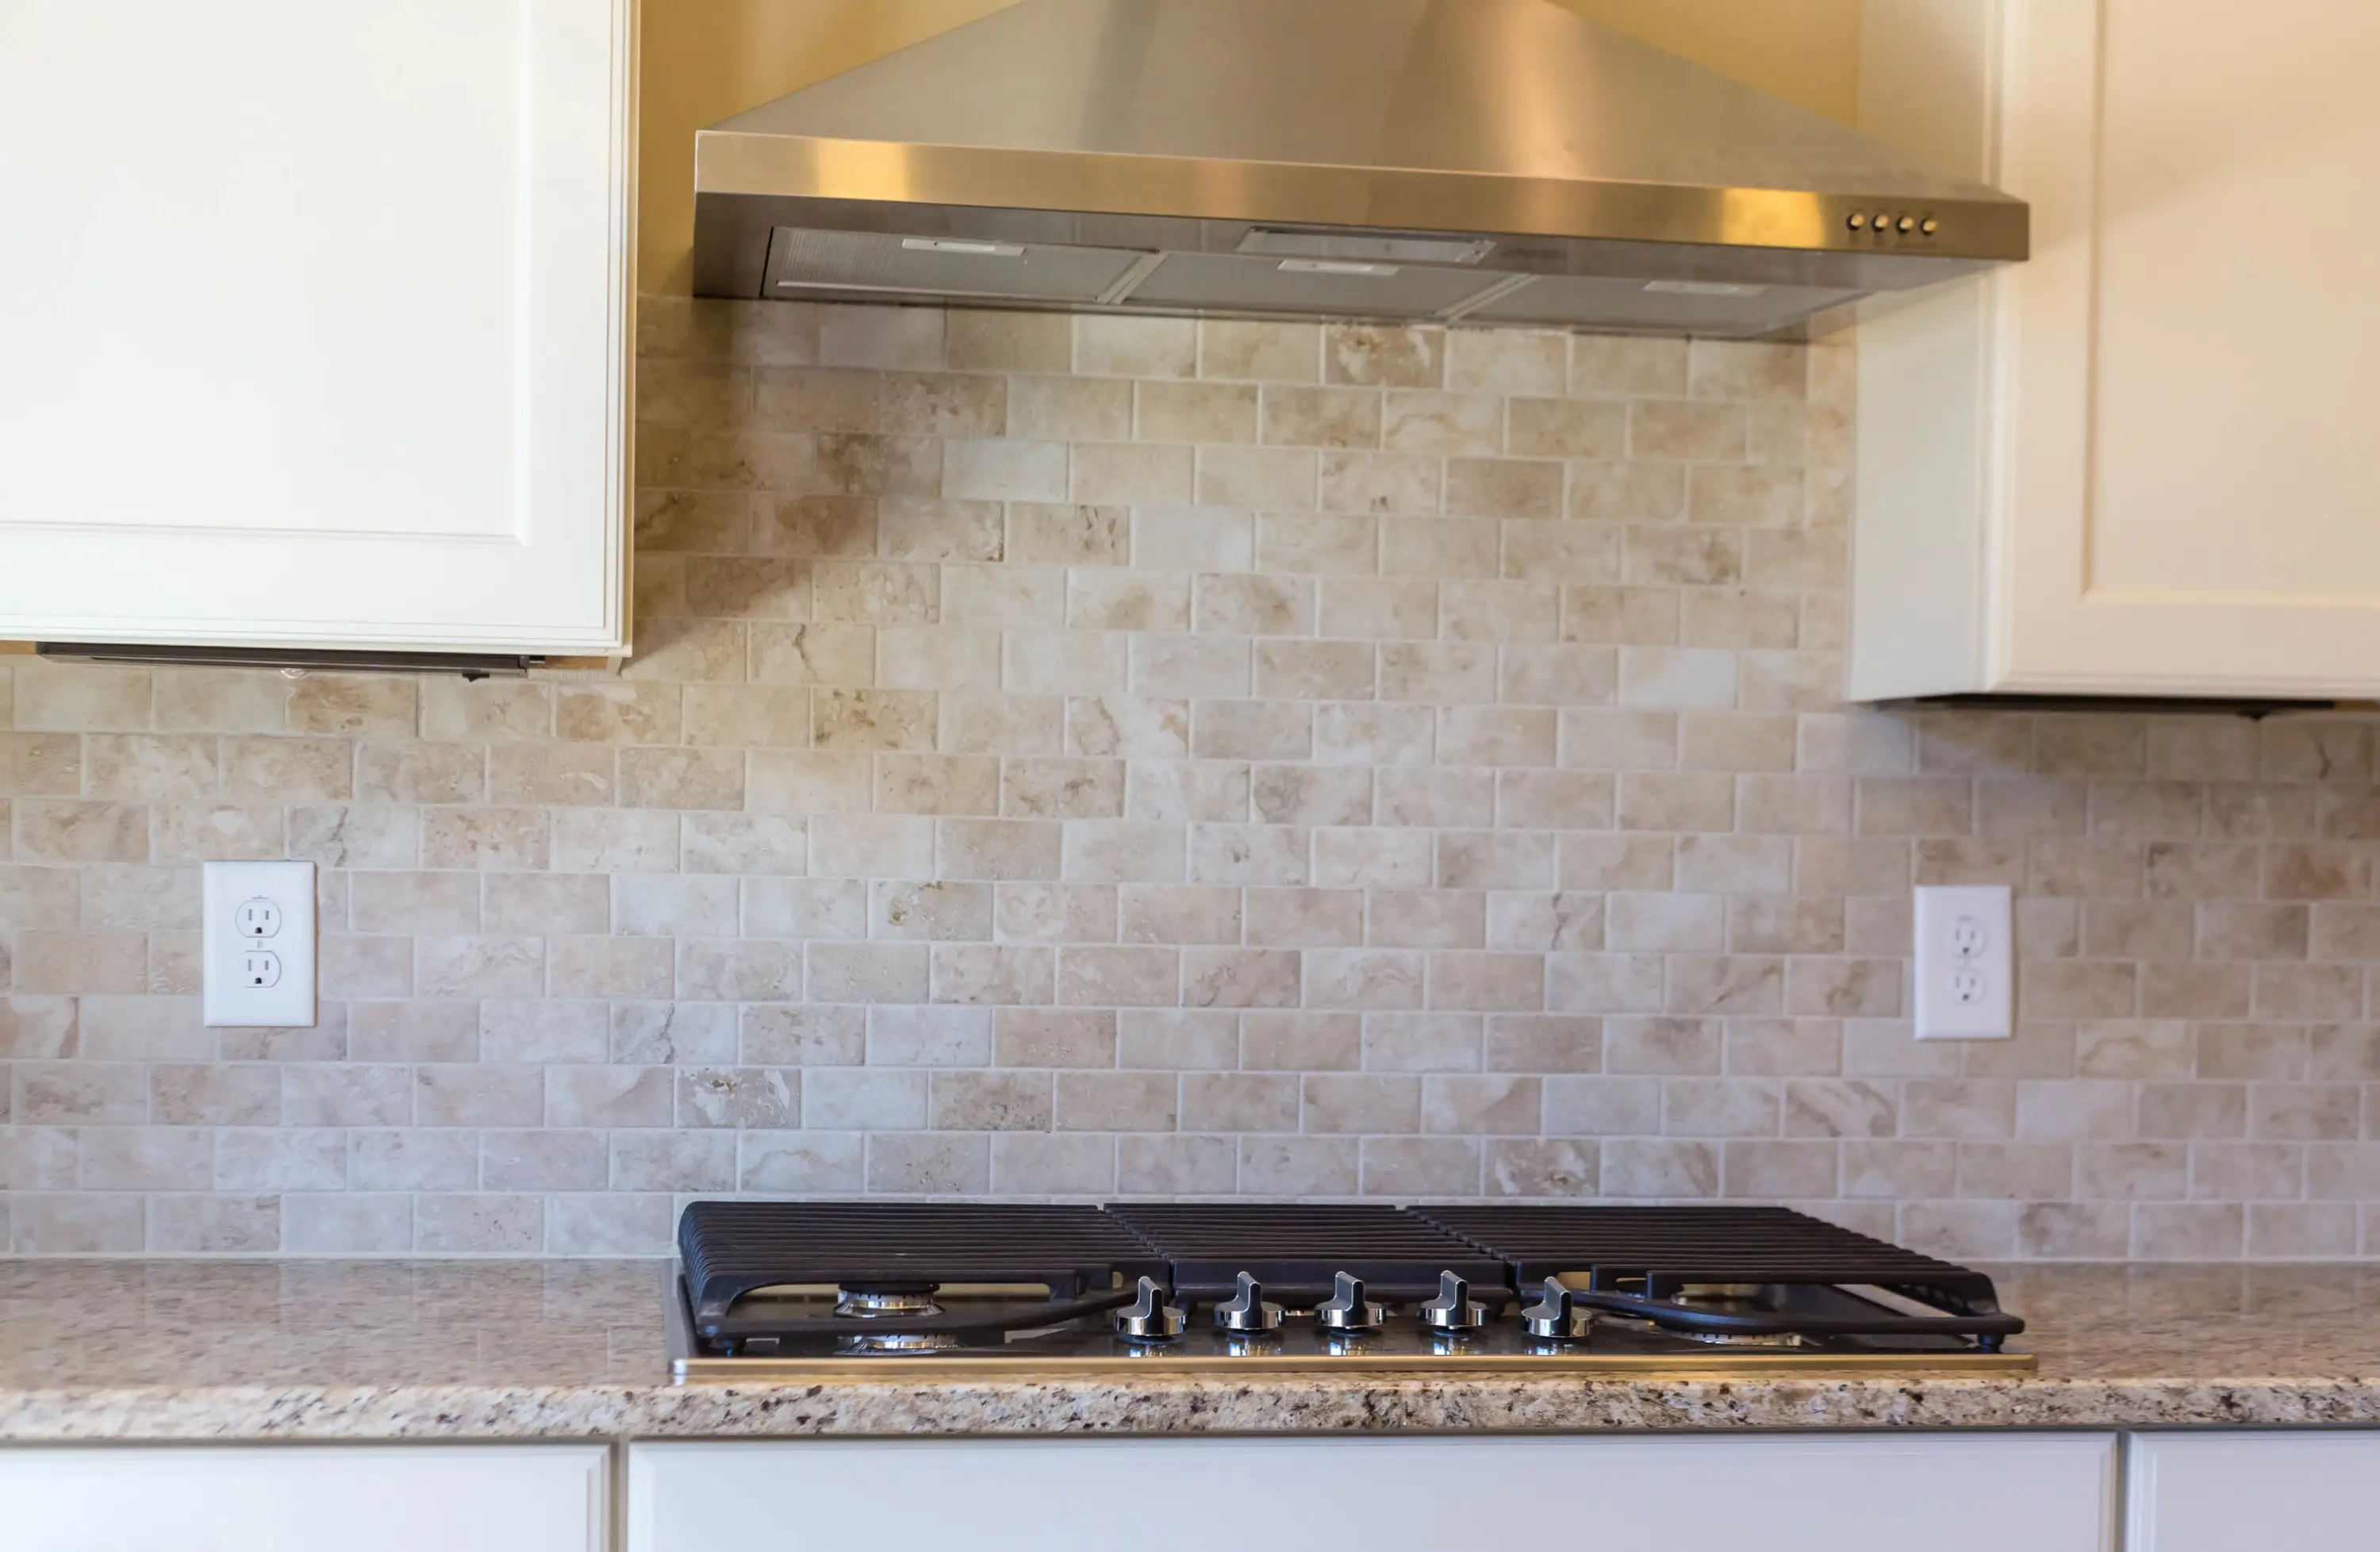 Full backsplash services for kitchens and bathrooms in Morrisville, NC.